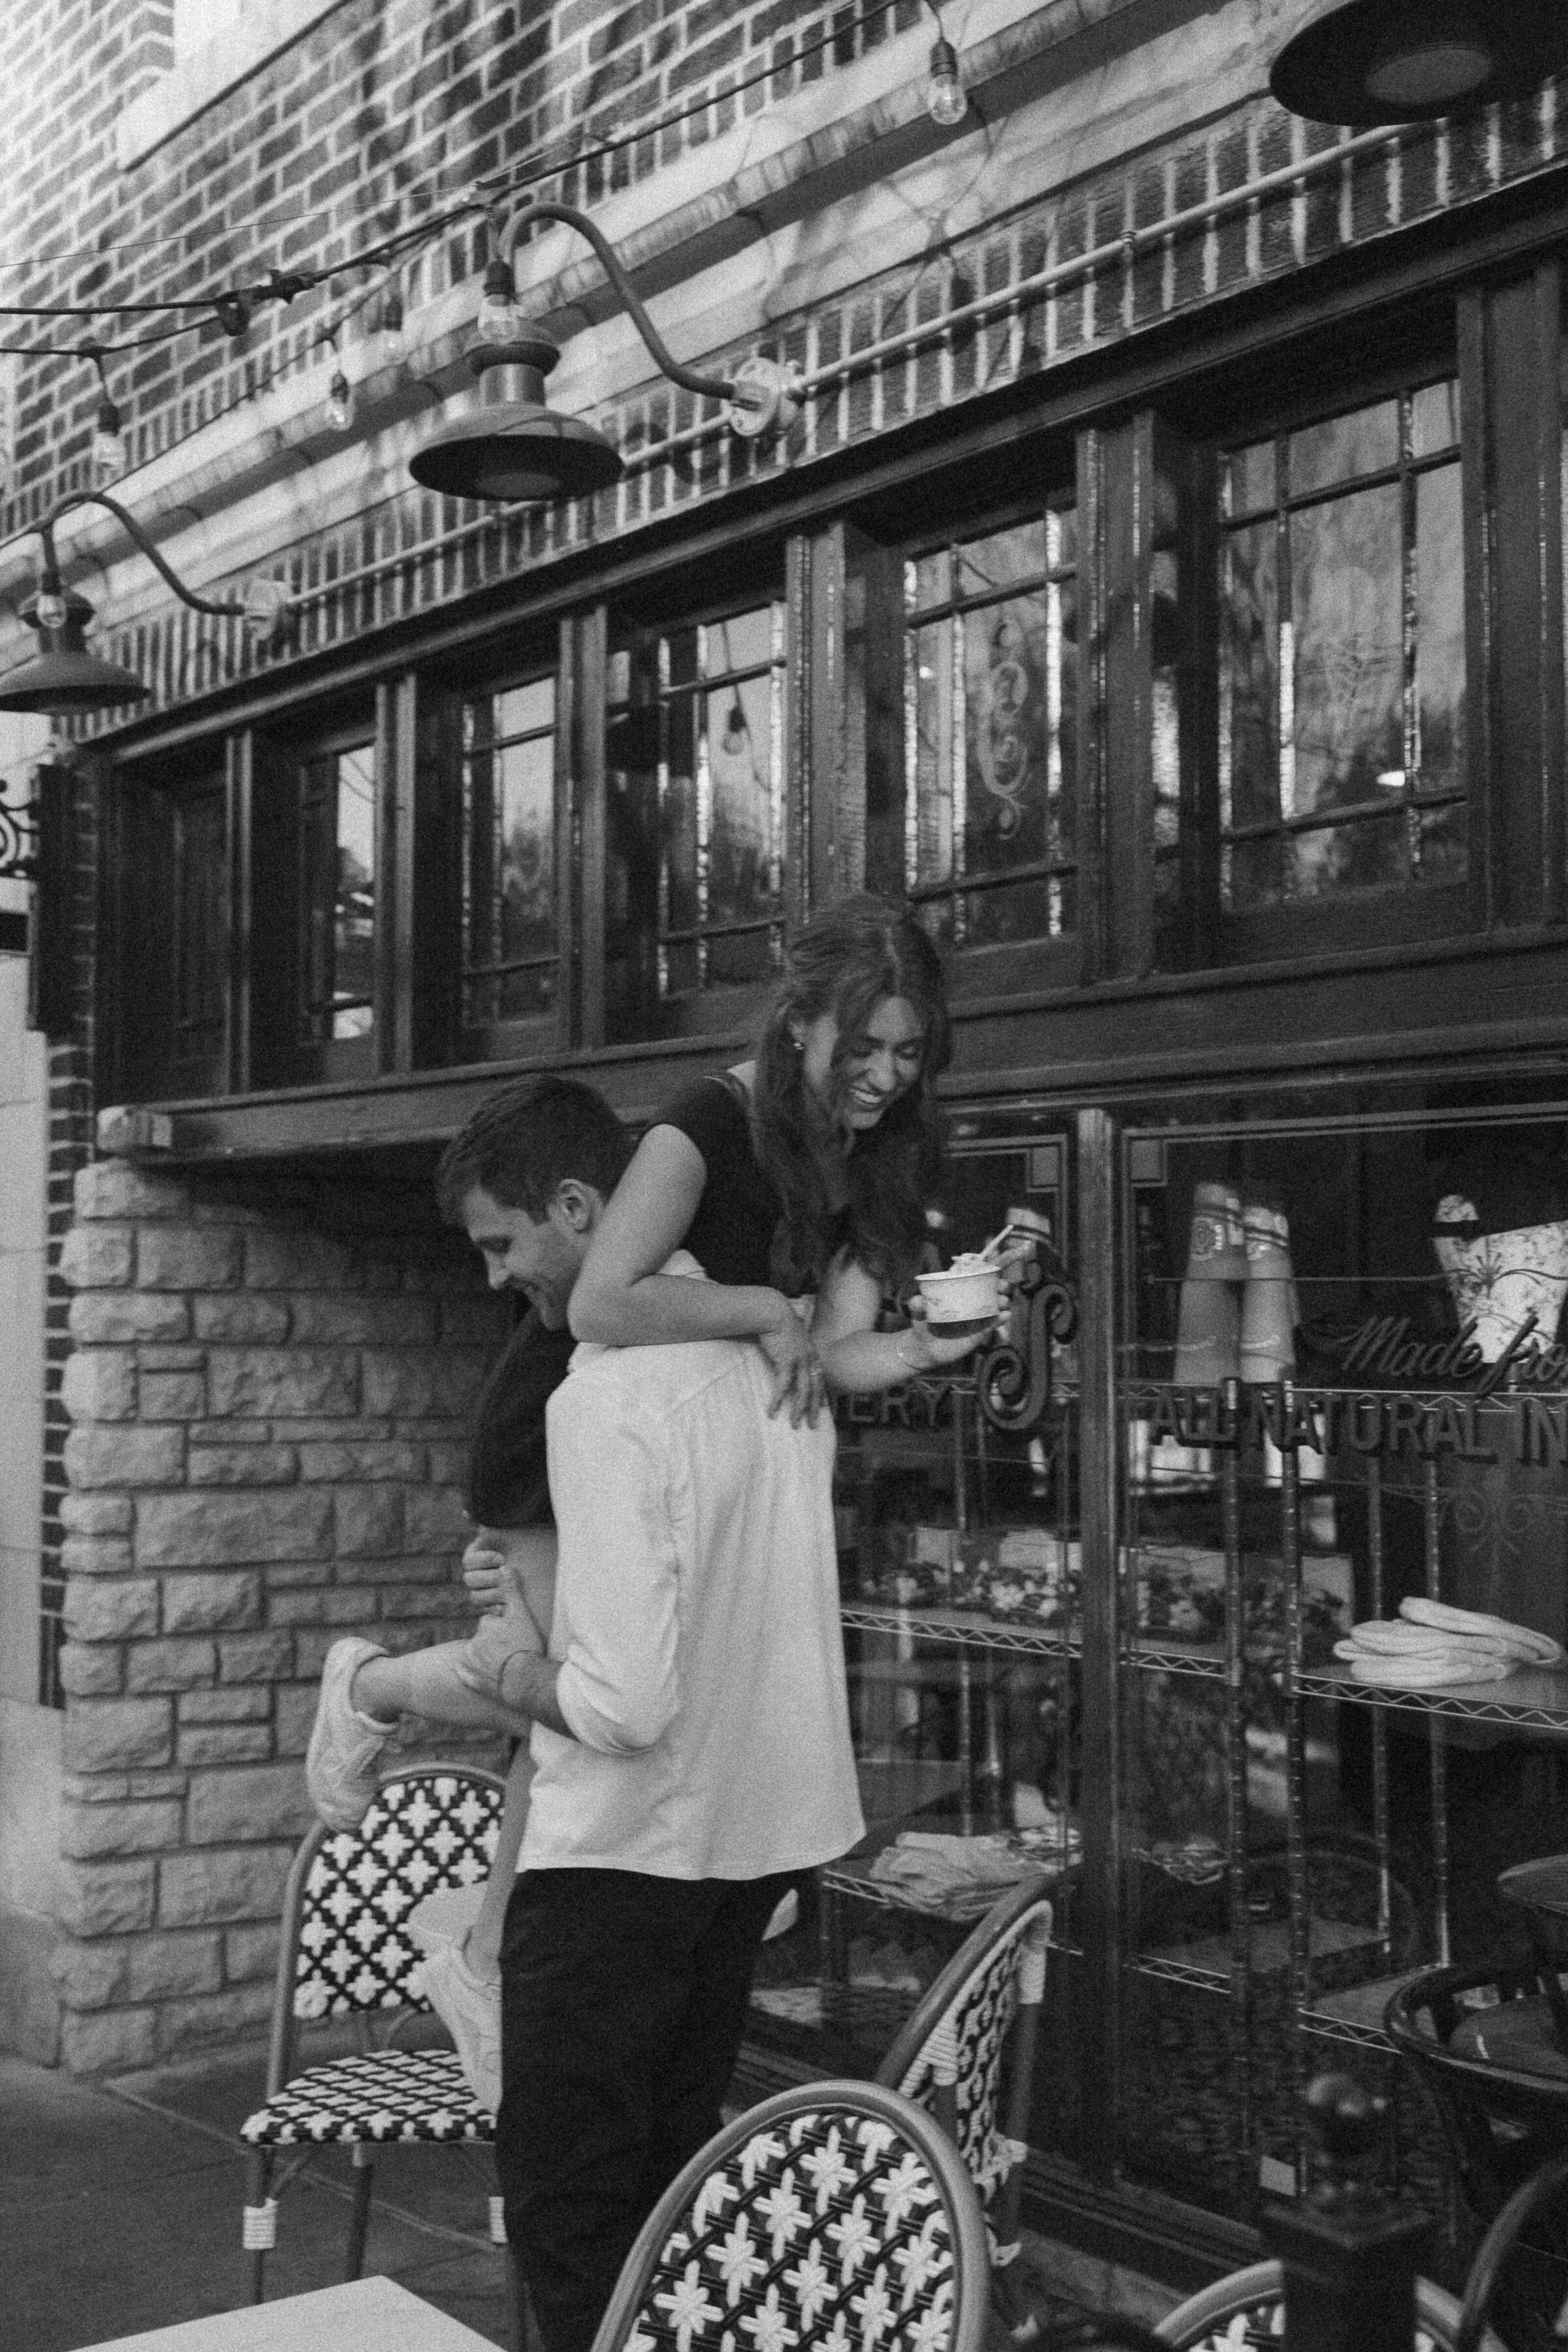 Couple laughing and sharing ice cream outside a cafe.